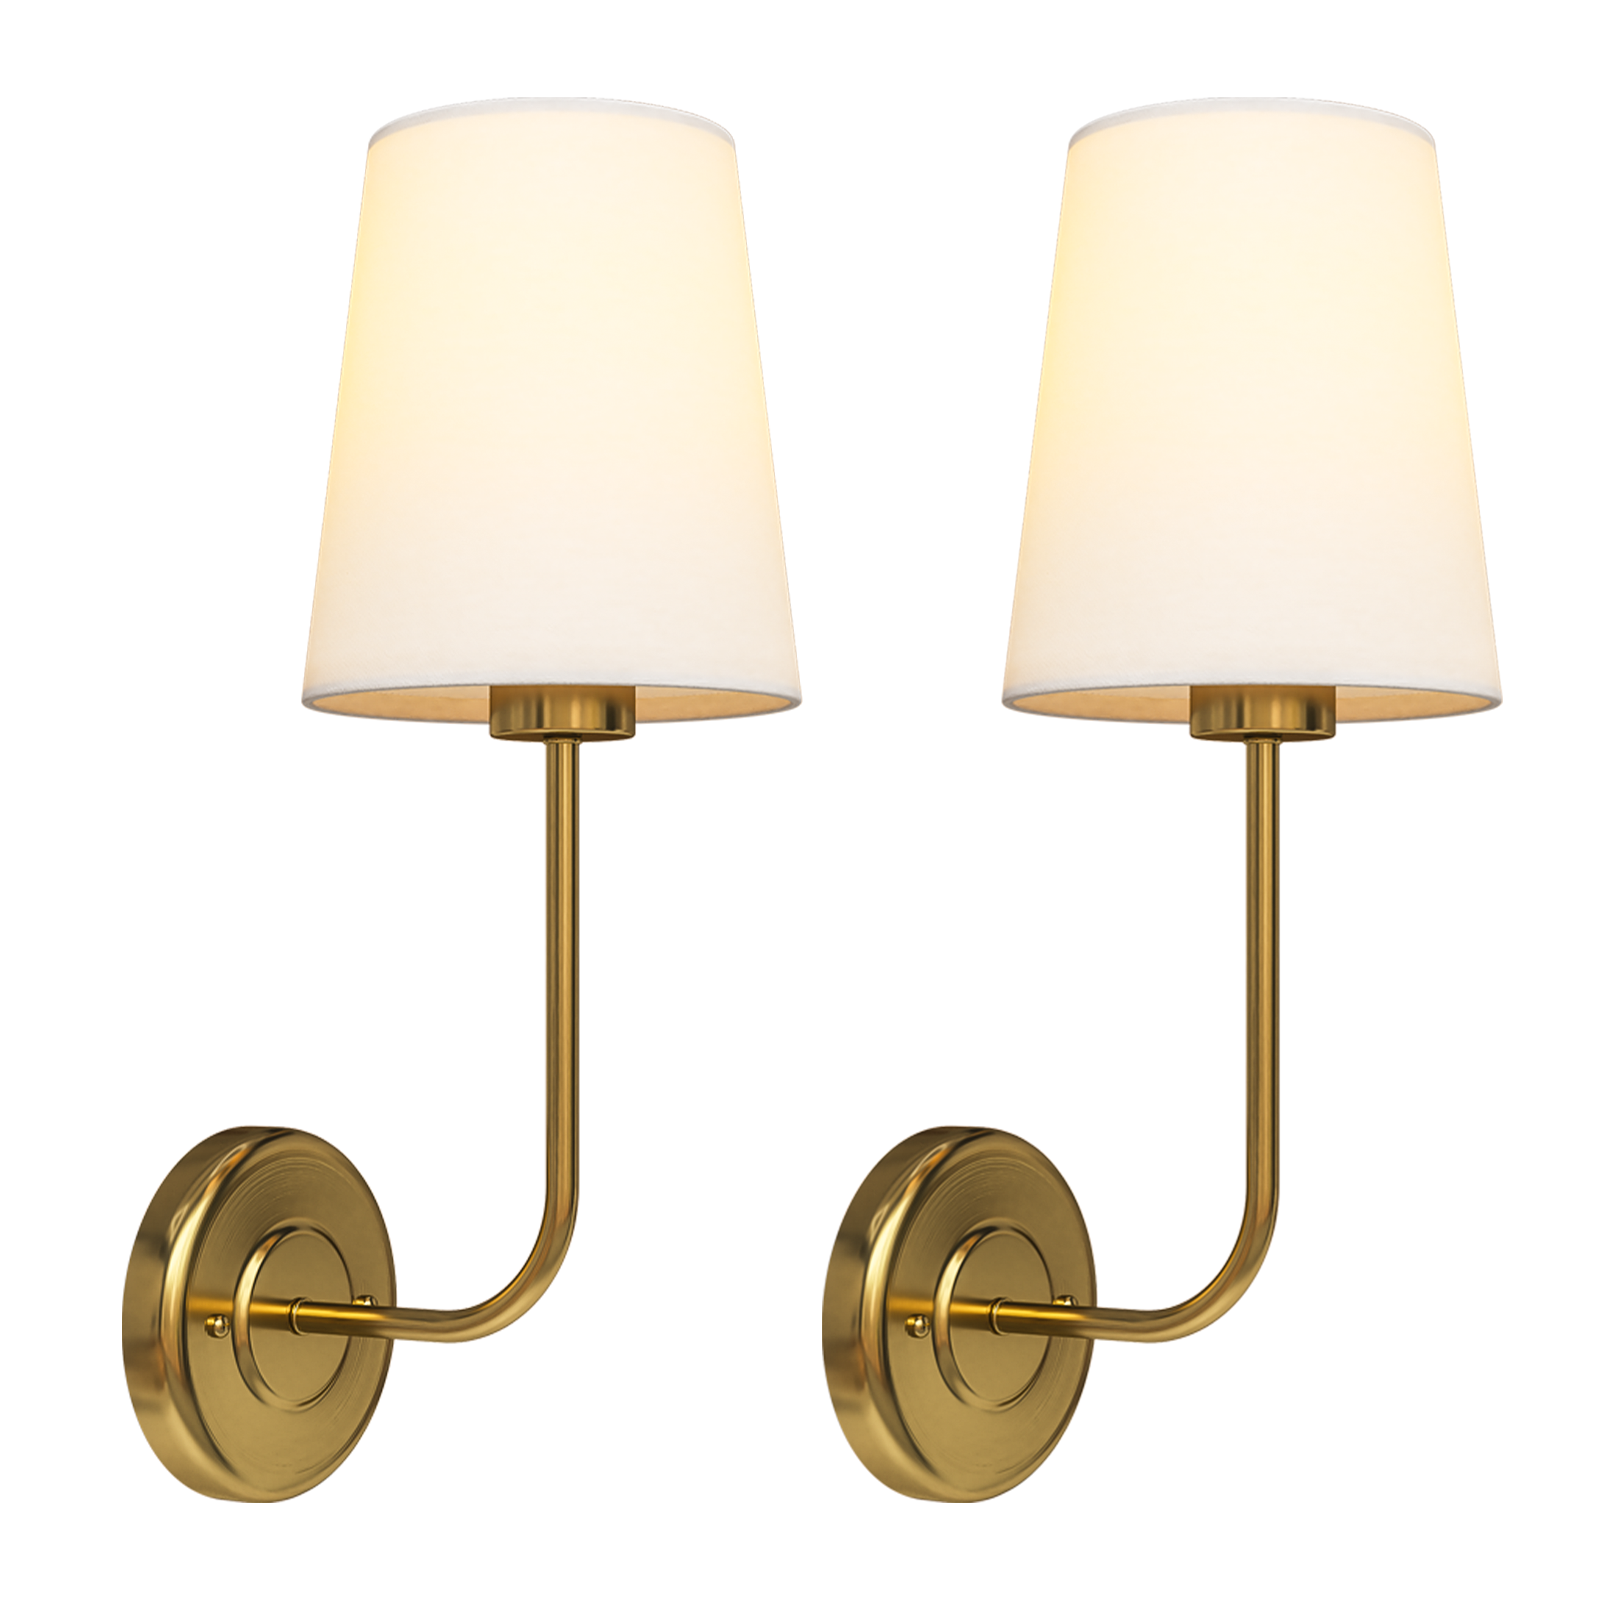 LUMIMAN Wall Sconces Set of Two, Brass Vintage Industrial Wall Sconce Light Fixture for Dining Room